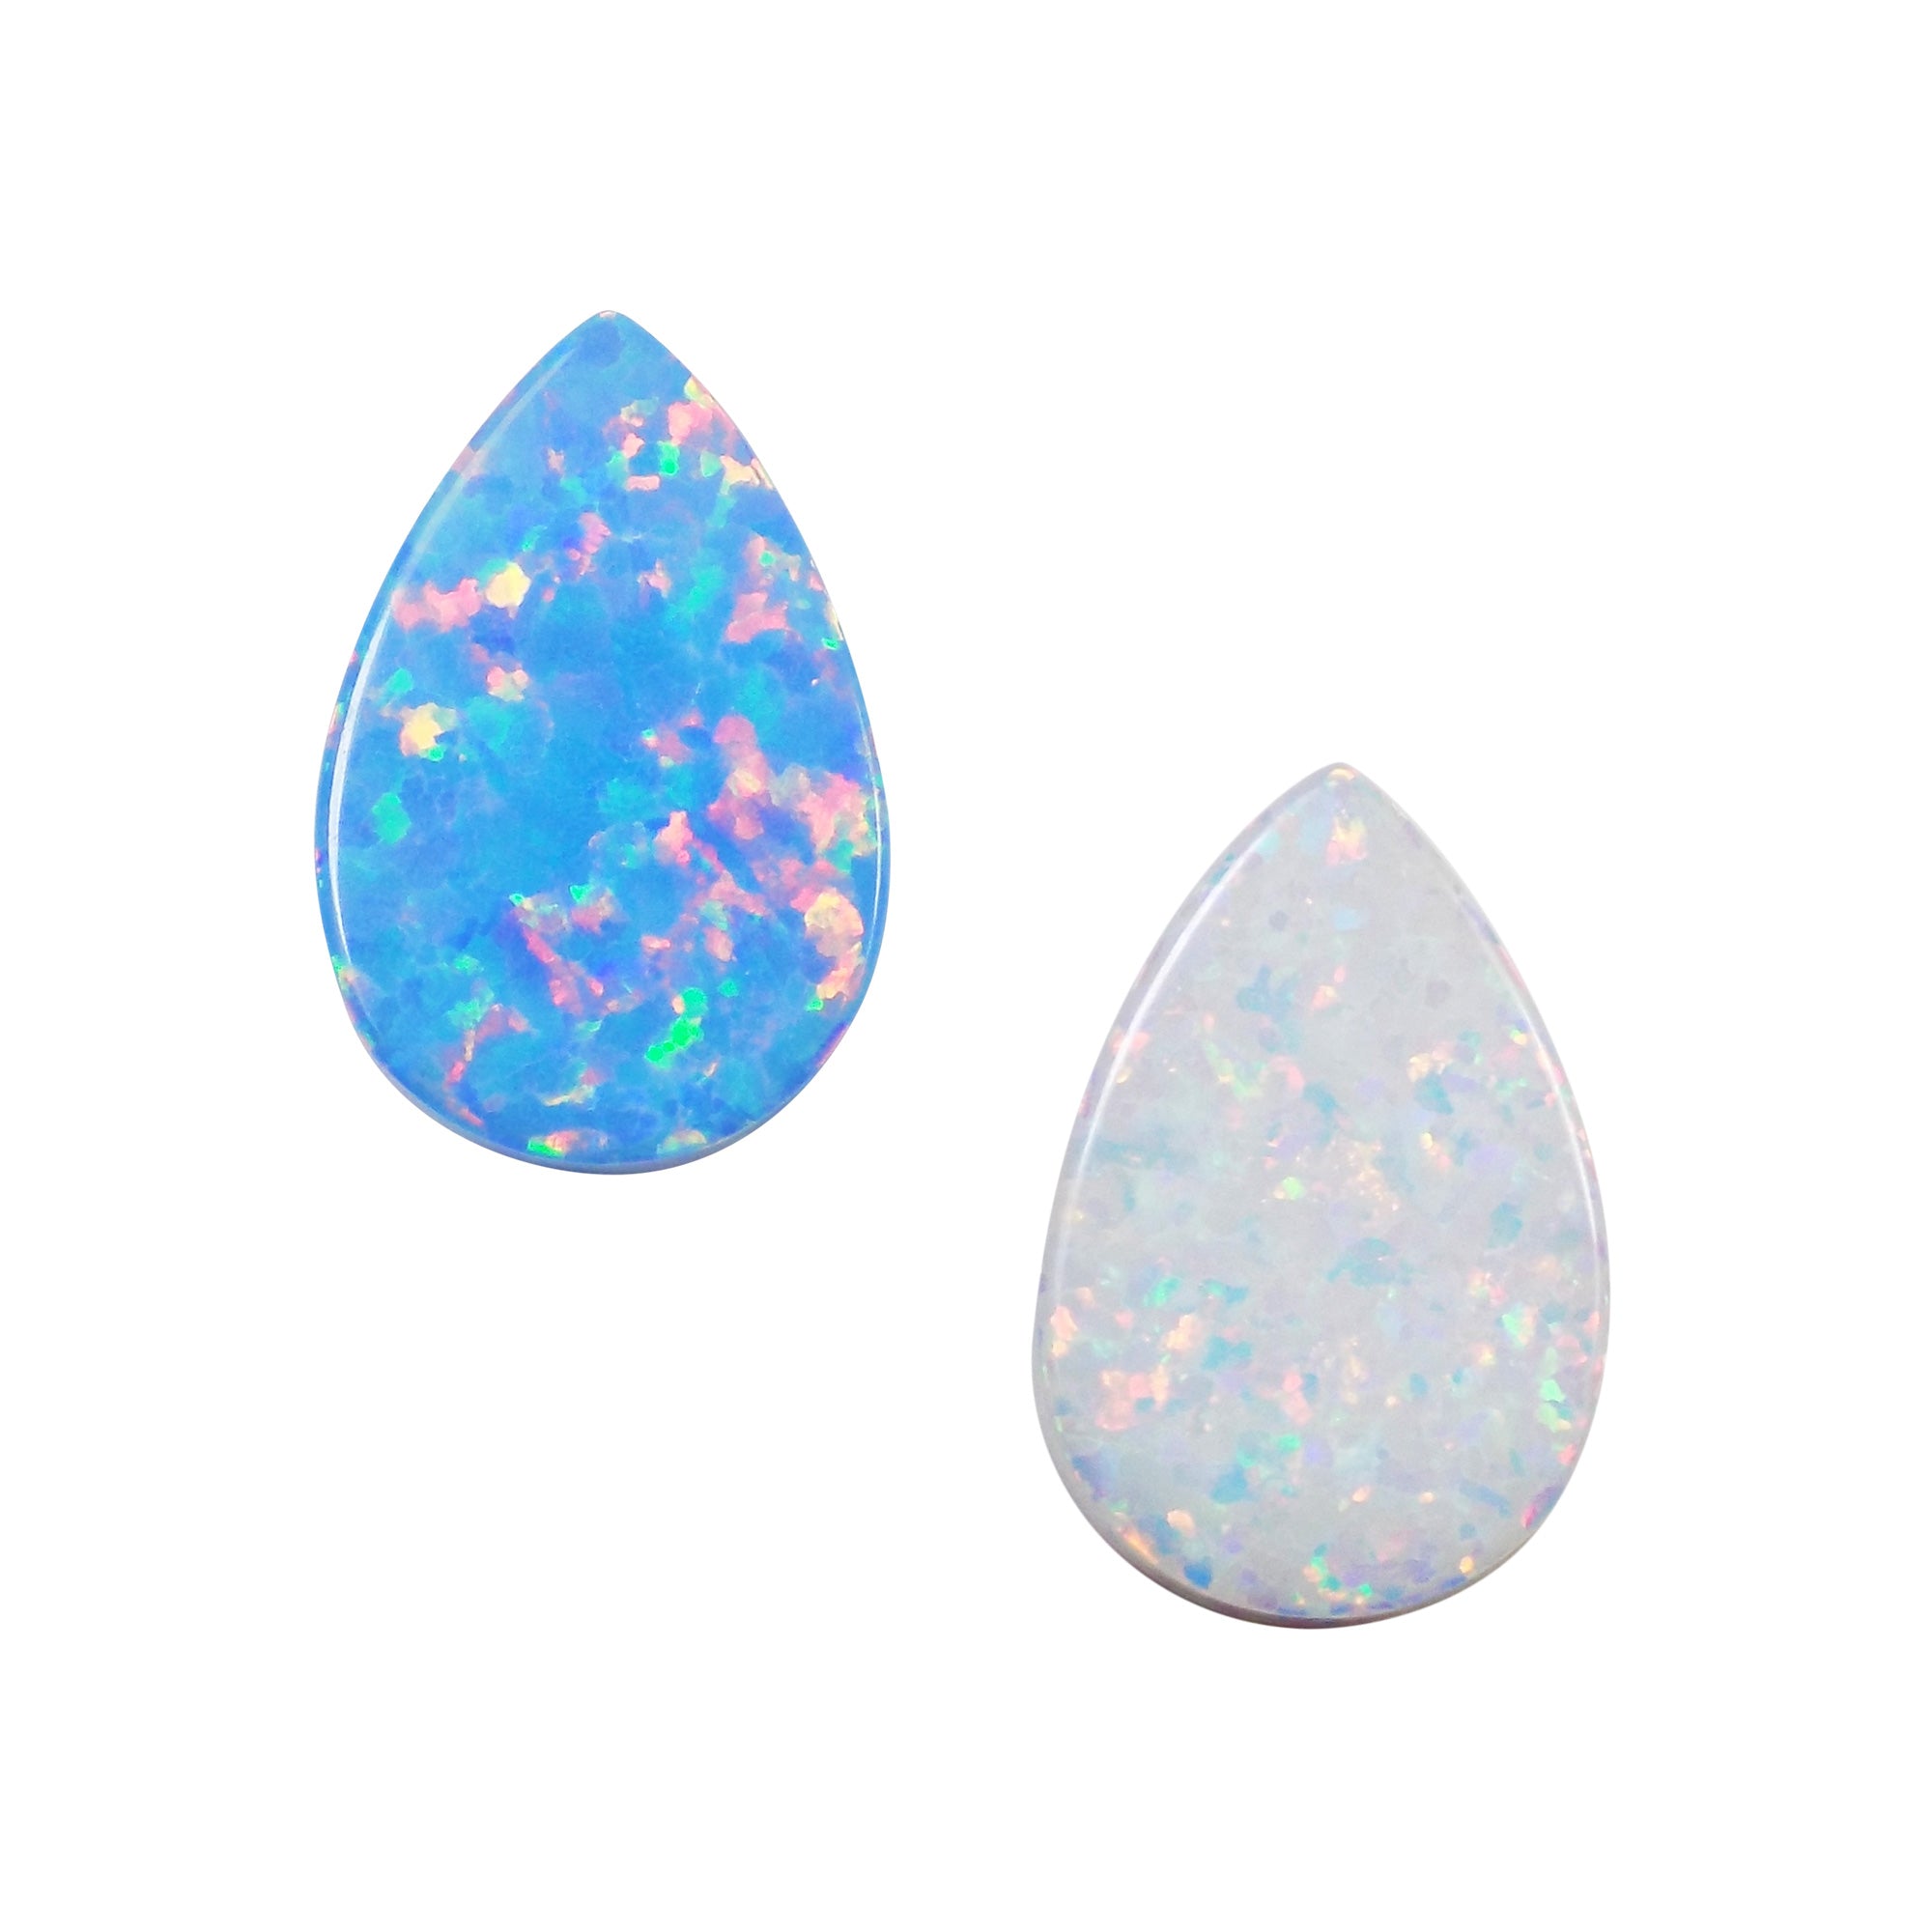 WHOLESALE WHITE SYNTHETIC LAB CREATED OPAL OVAL SHAPE CABOCHON VARIOUS SIZES 